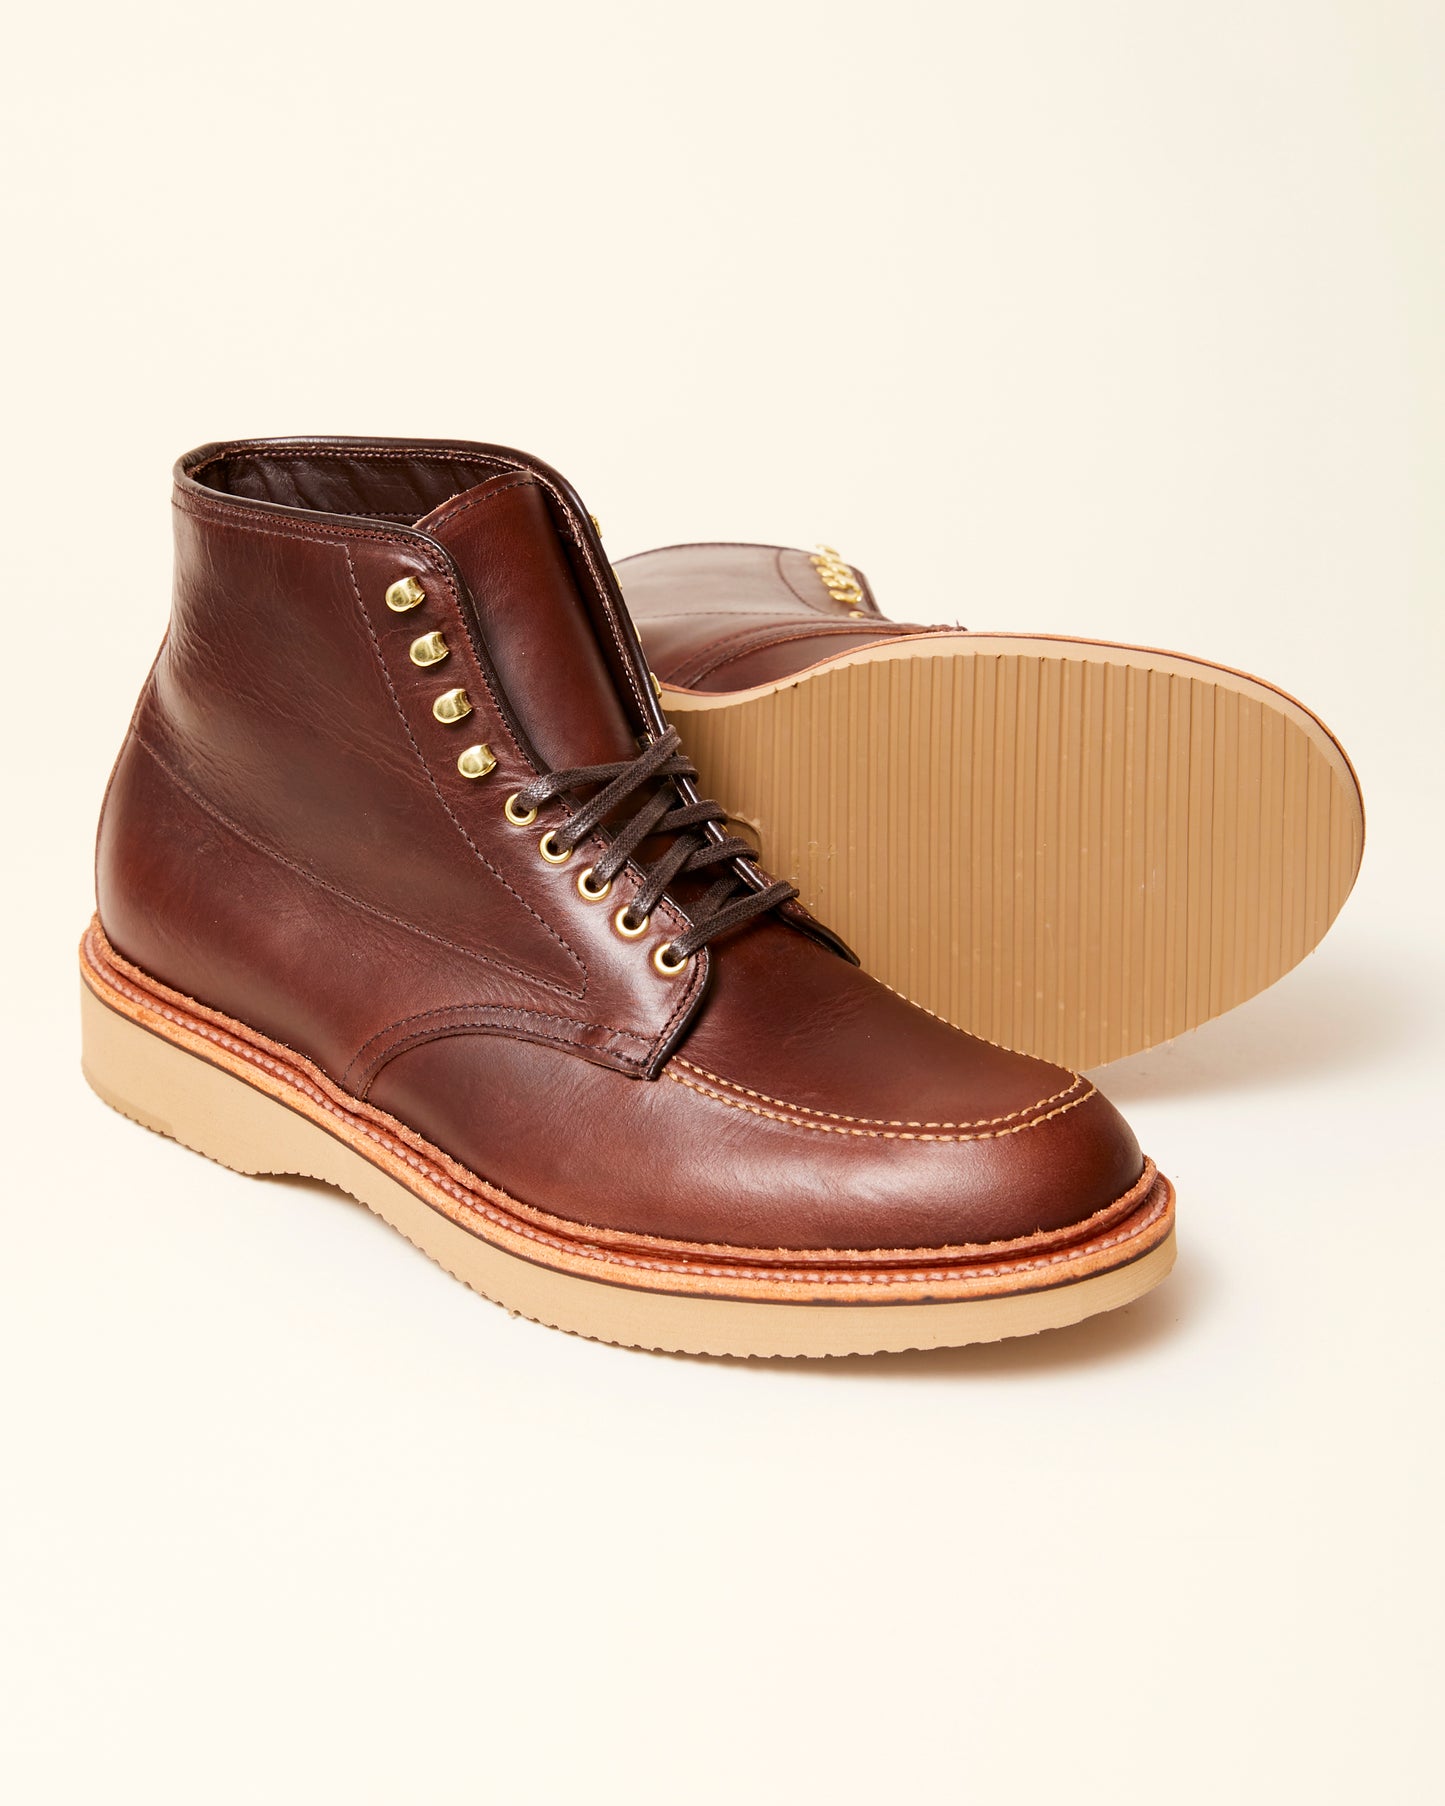 "Olympic" Brown Chromexcel Indy Boot